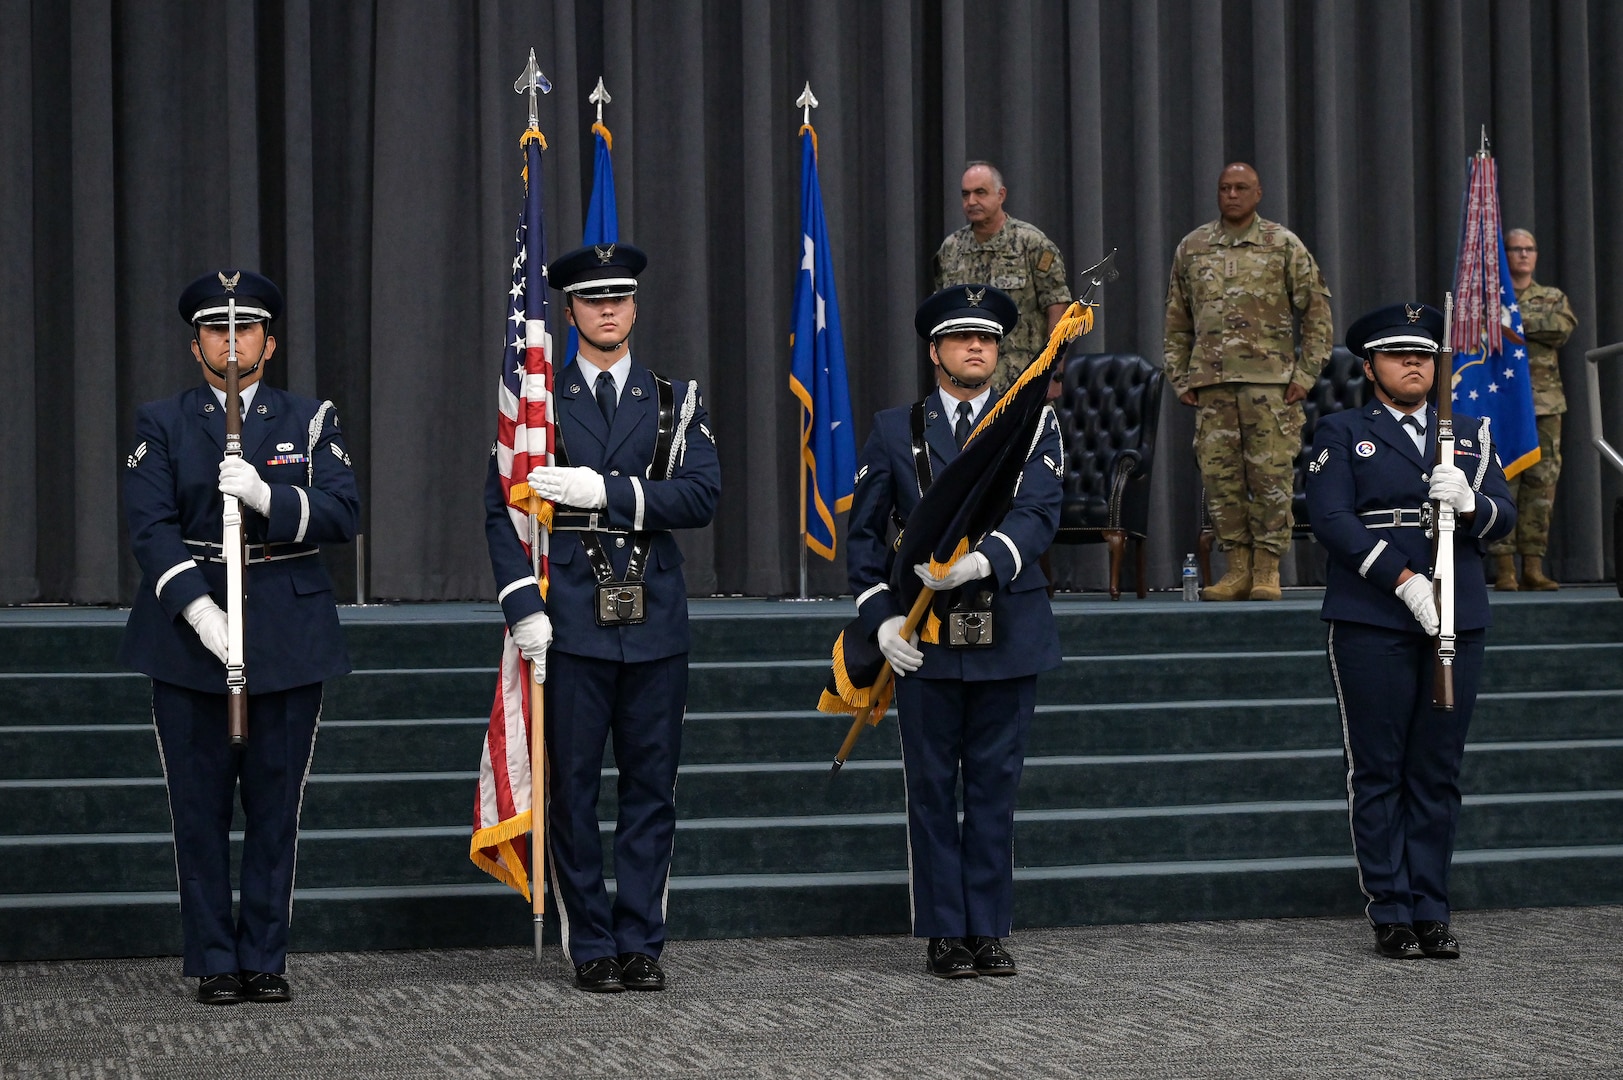 Barksdale Air Force Base Honor Guard presents the United States Flag and the U.S. Strategic Command flag during the presentation of the Joint Meritorious Unit Award that was given to AFGSC in recognition of the command’s efforts and achievements during the height of the COVID-19 pandemic. AFGSC shaped key national security policies and provided warfighting solutions across the spectrum of global operations. (U.S. Air Force photo by Senior Airman Jonathan E. Ramos)